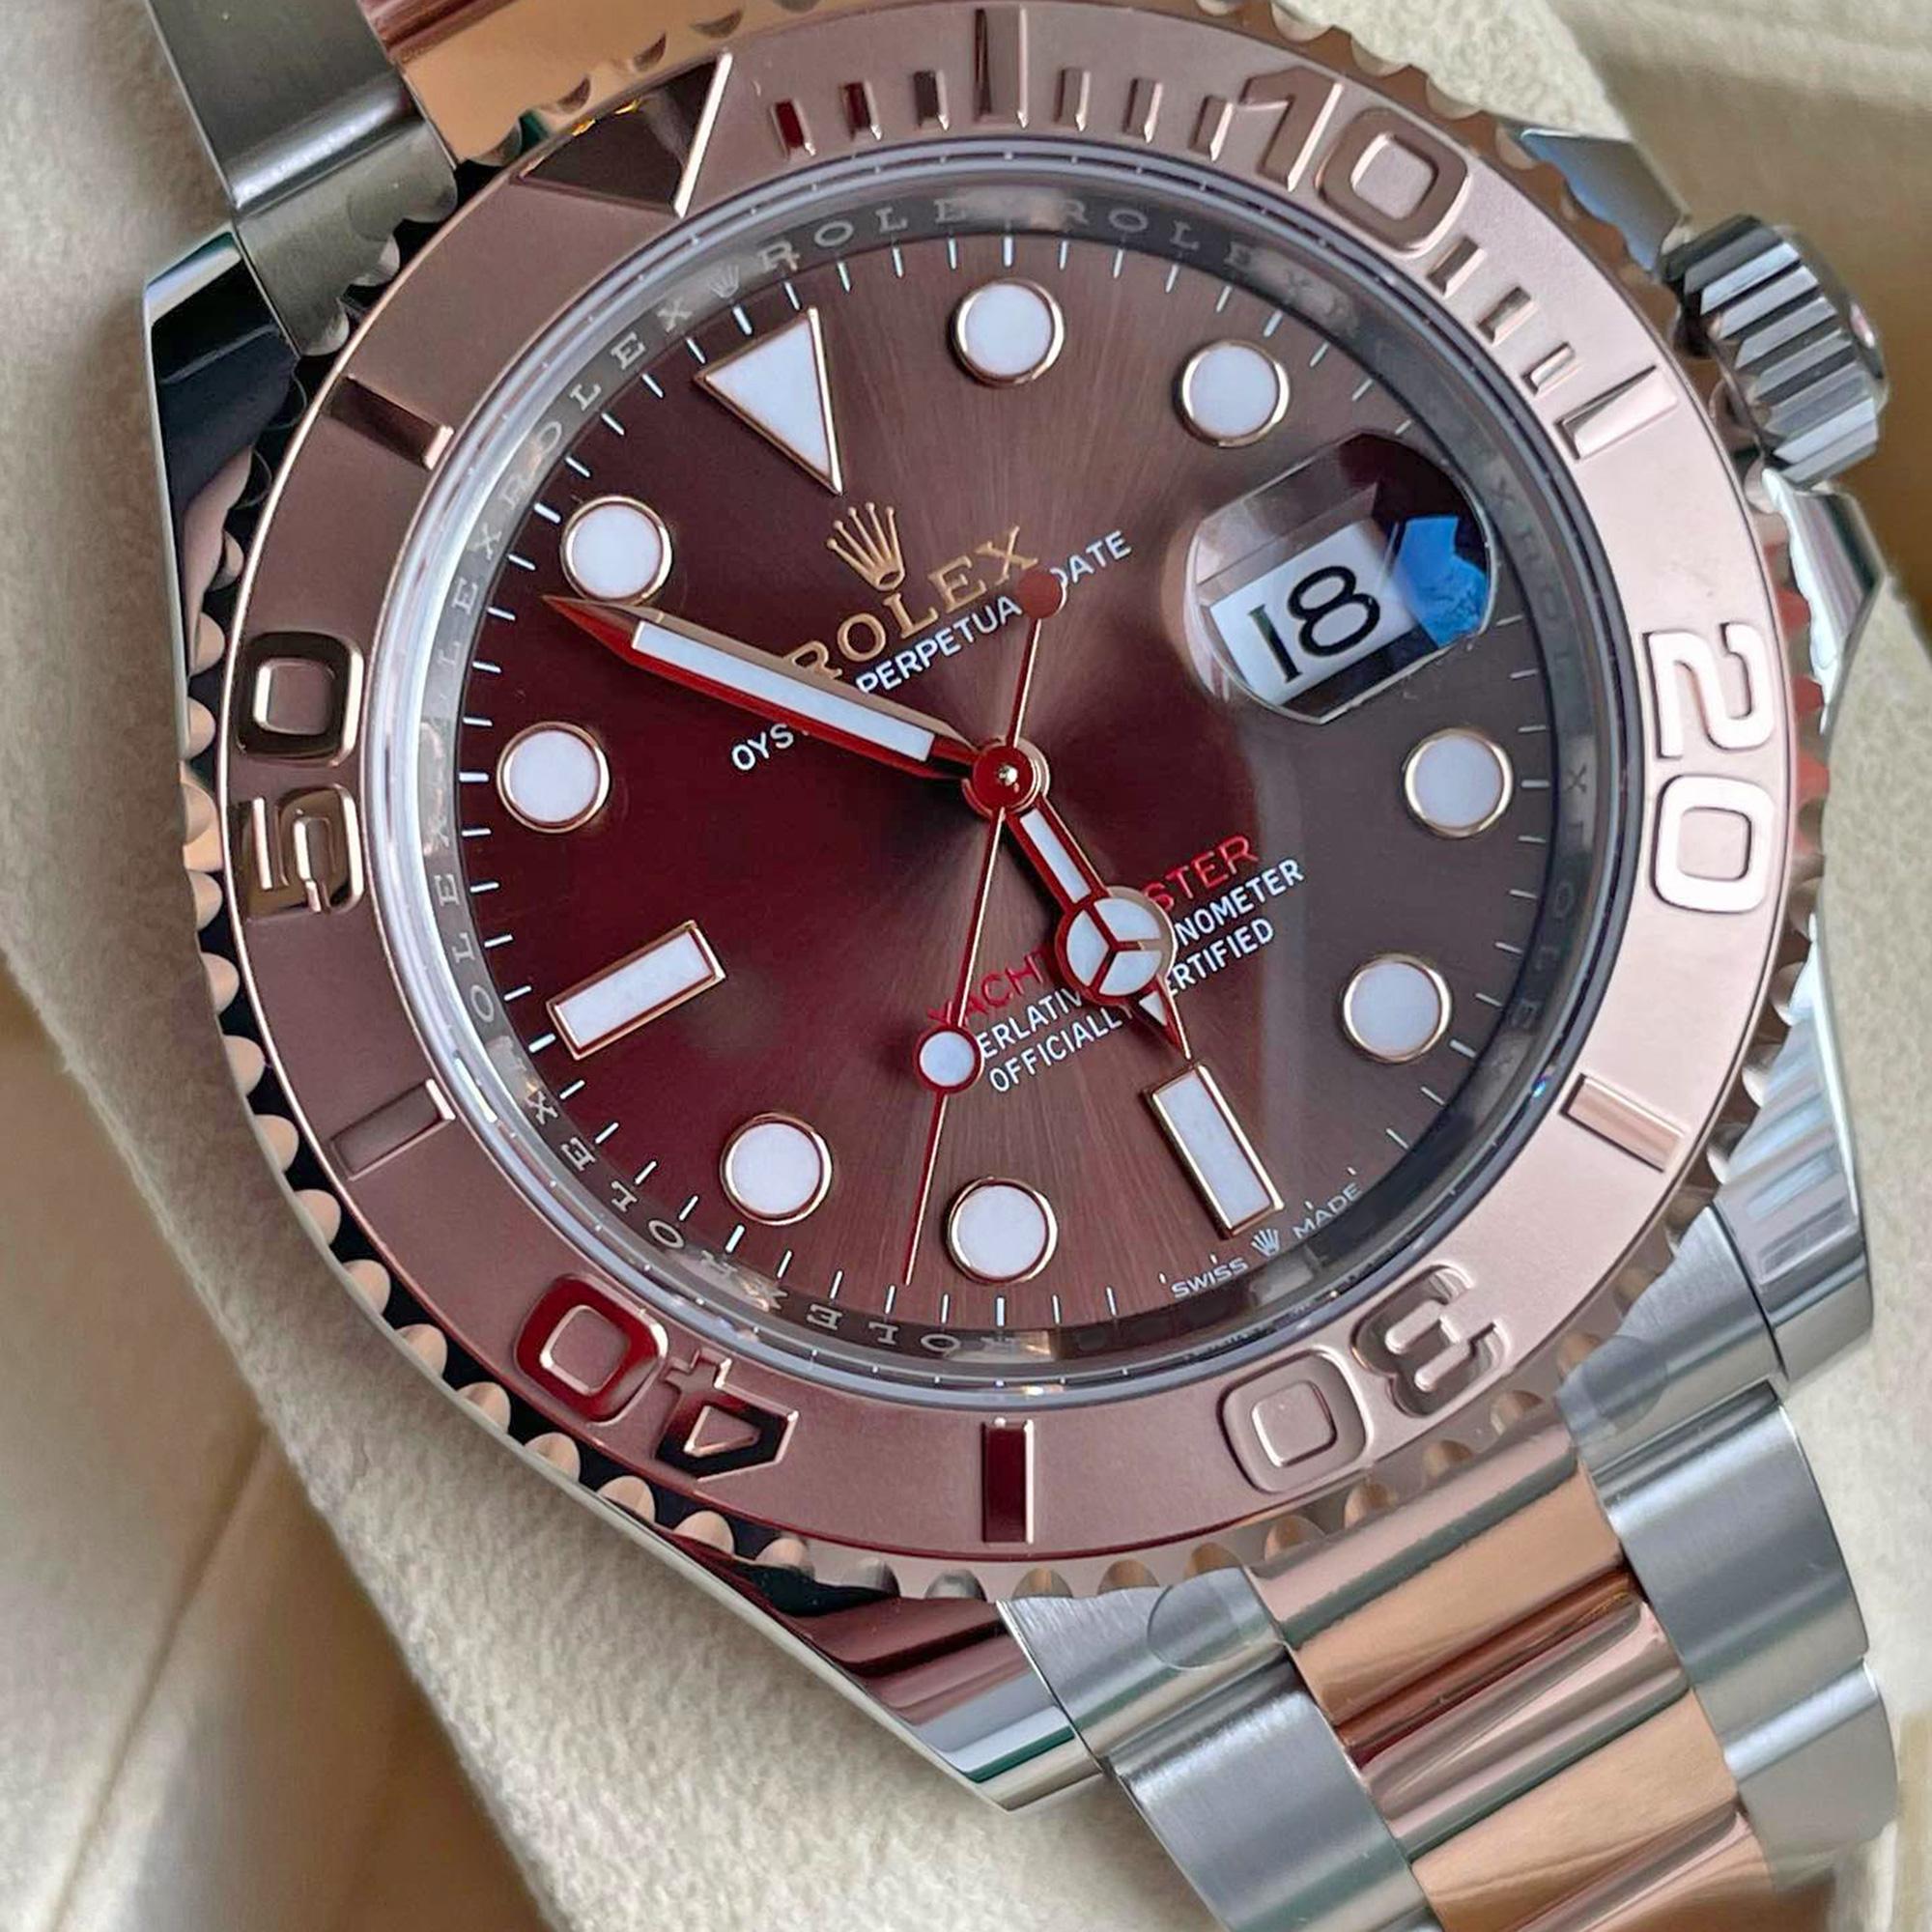 Rolex Yacht-Master 40 watch with Stainless Steel and 18k Everose Gold case. This model has Chocolate dial with a fine sunray. Polished 18k Everose Gold hour and minute hands in Mercedes-logo and sword shape with luminous fill. Polished 18k Everose